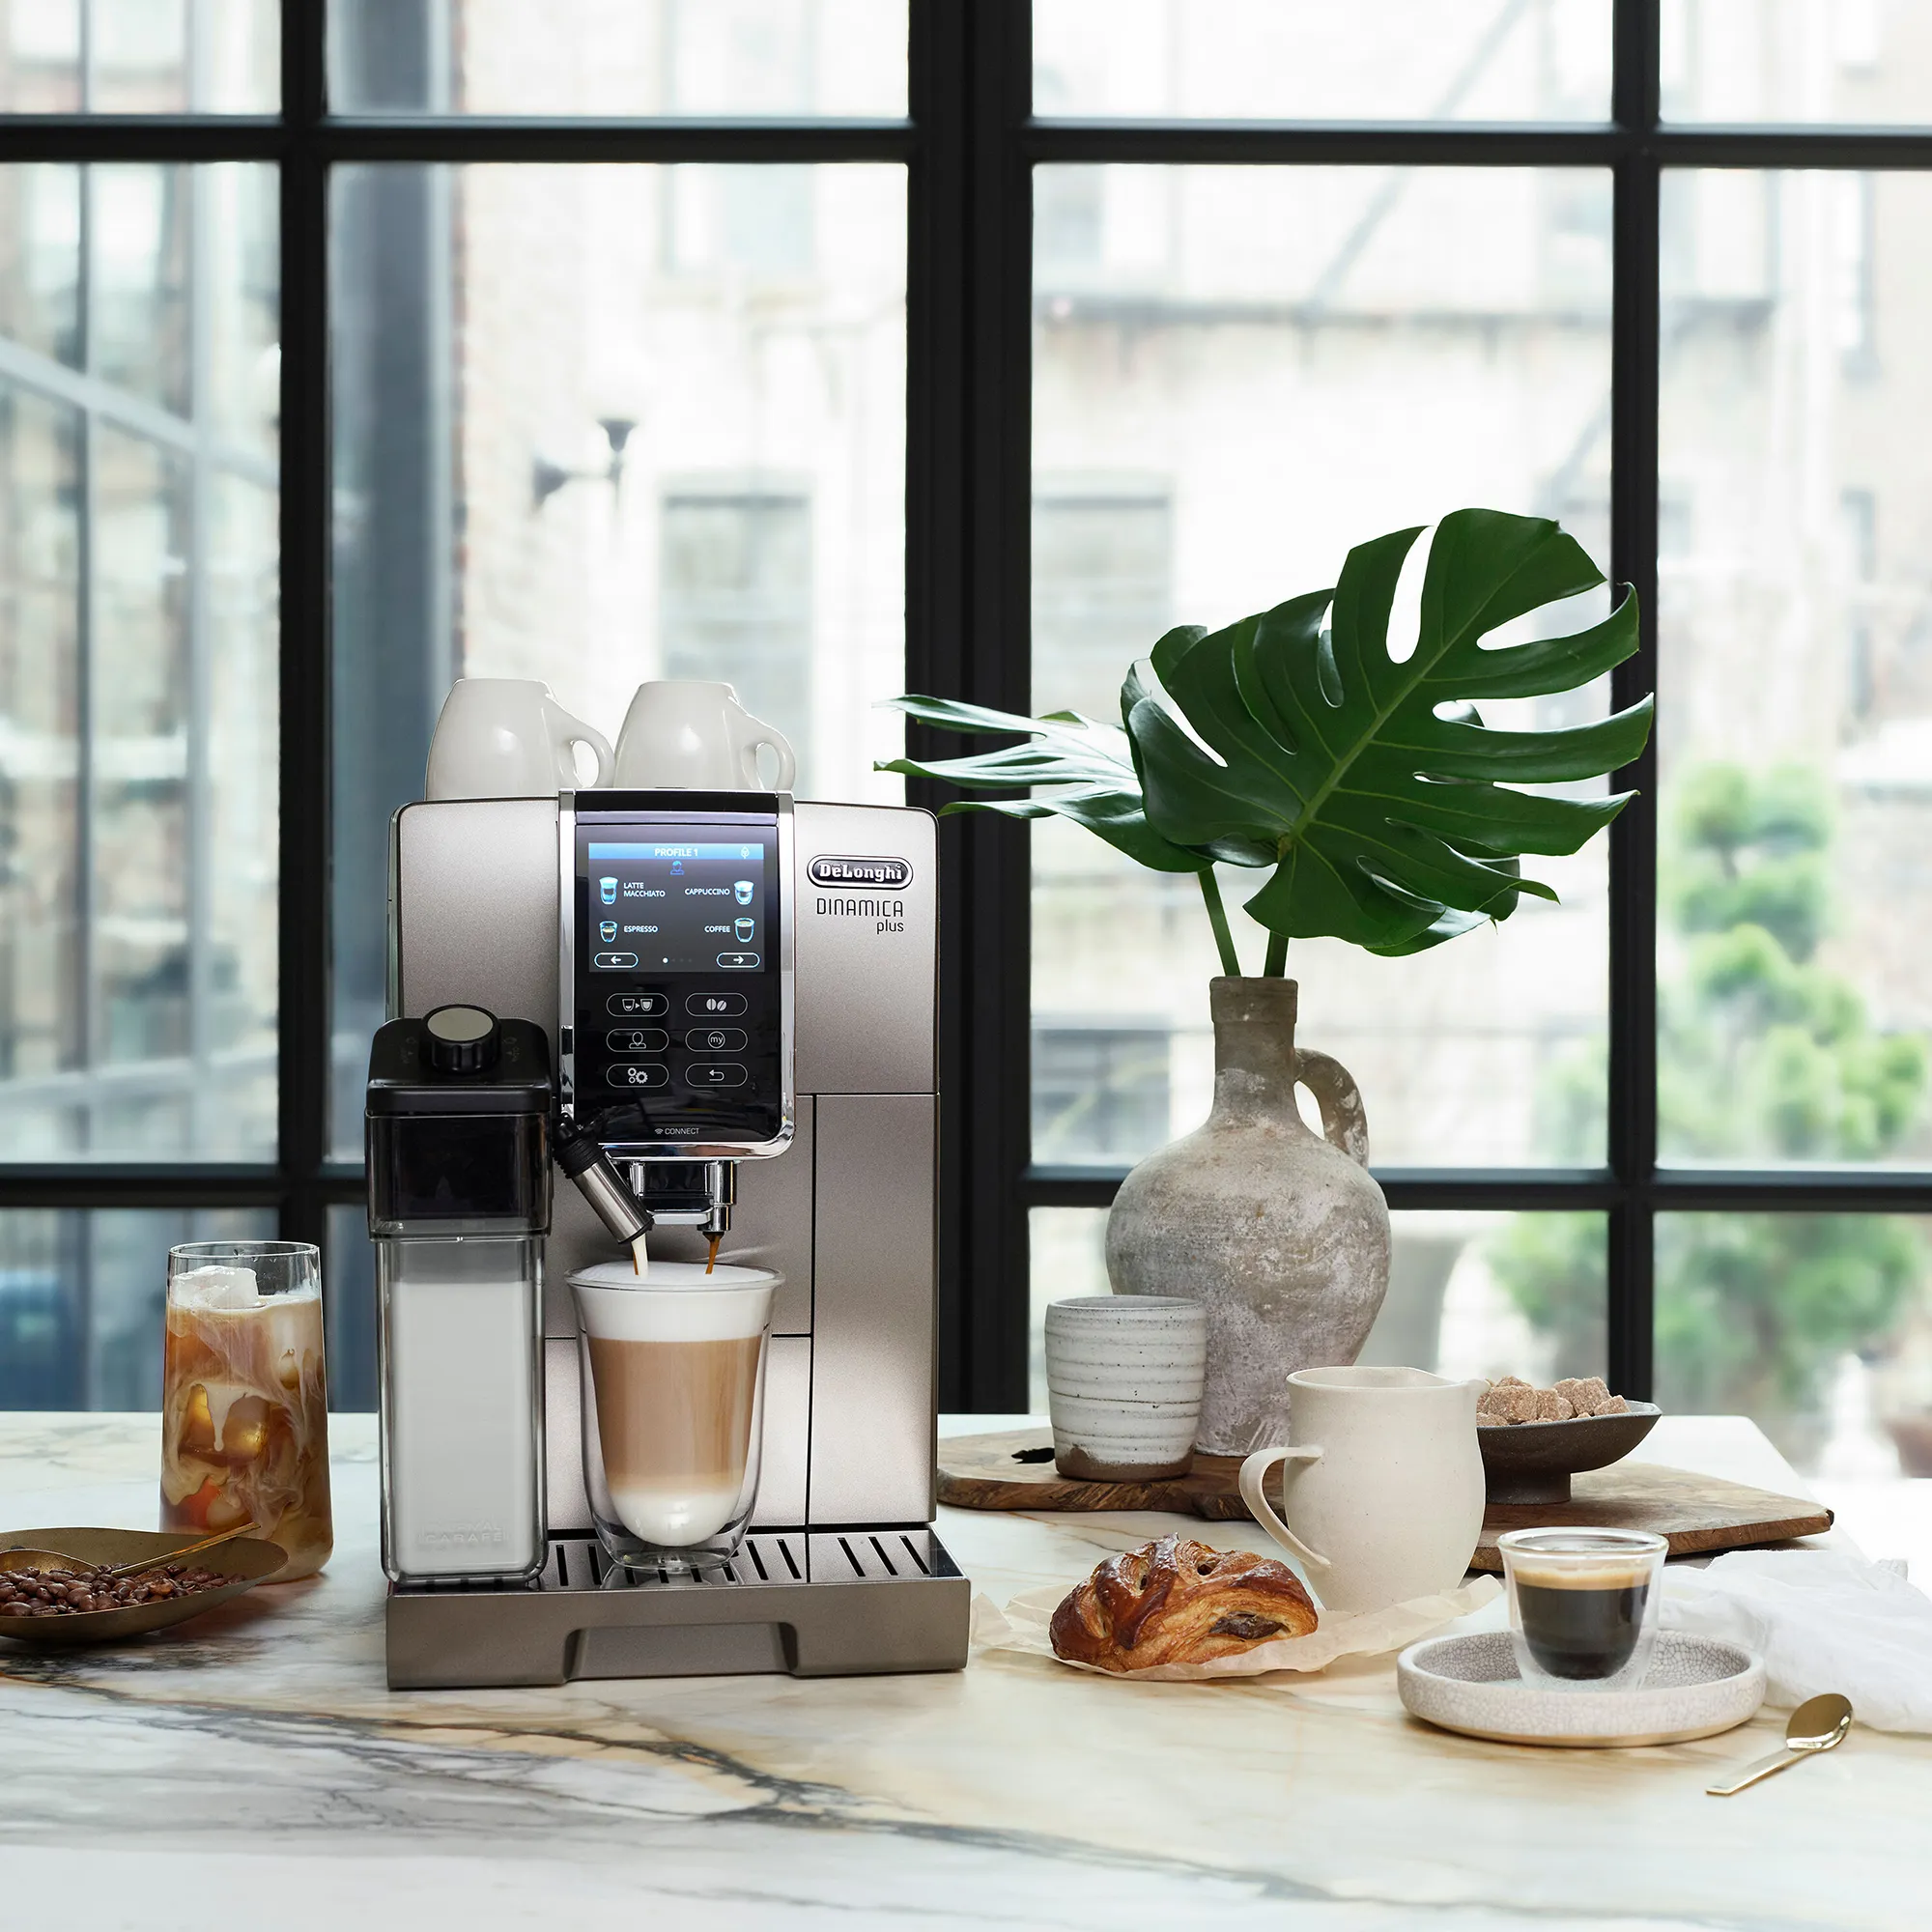 https://www.homethreads.com/files/delonghi/ecam37095ti-dinamica-plus-smart-coffee-and-espresso-machine-with-coffee-link-connectivity-app-and-automatic-milk-frother-titanium-6.webp